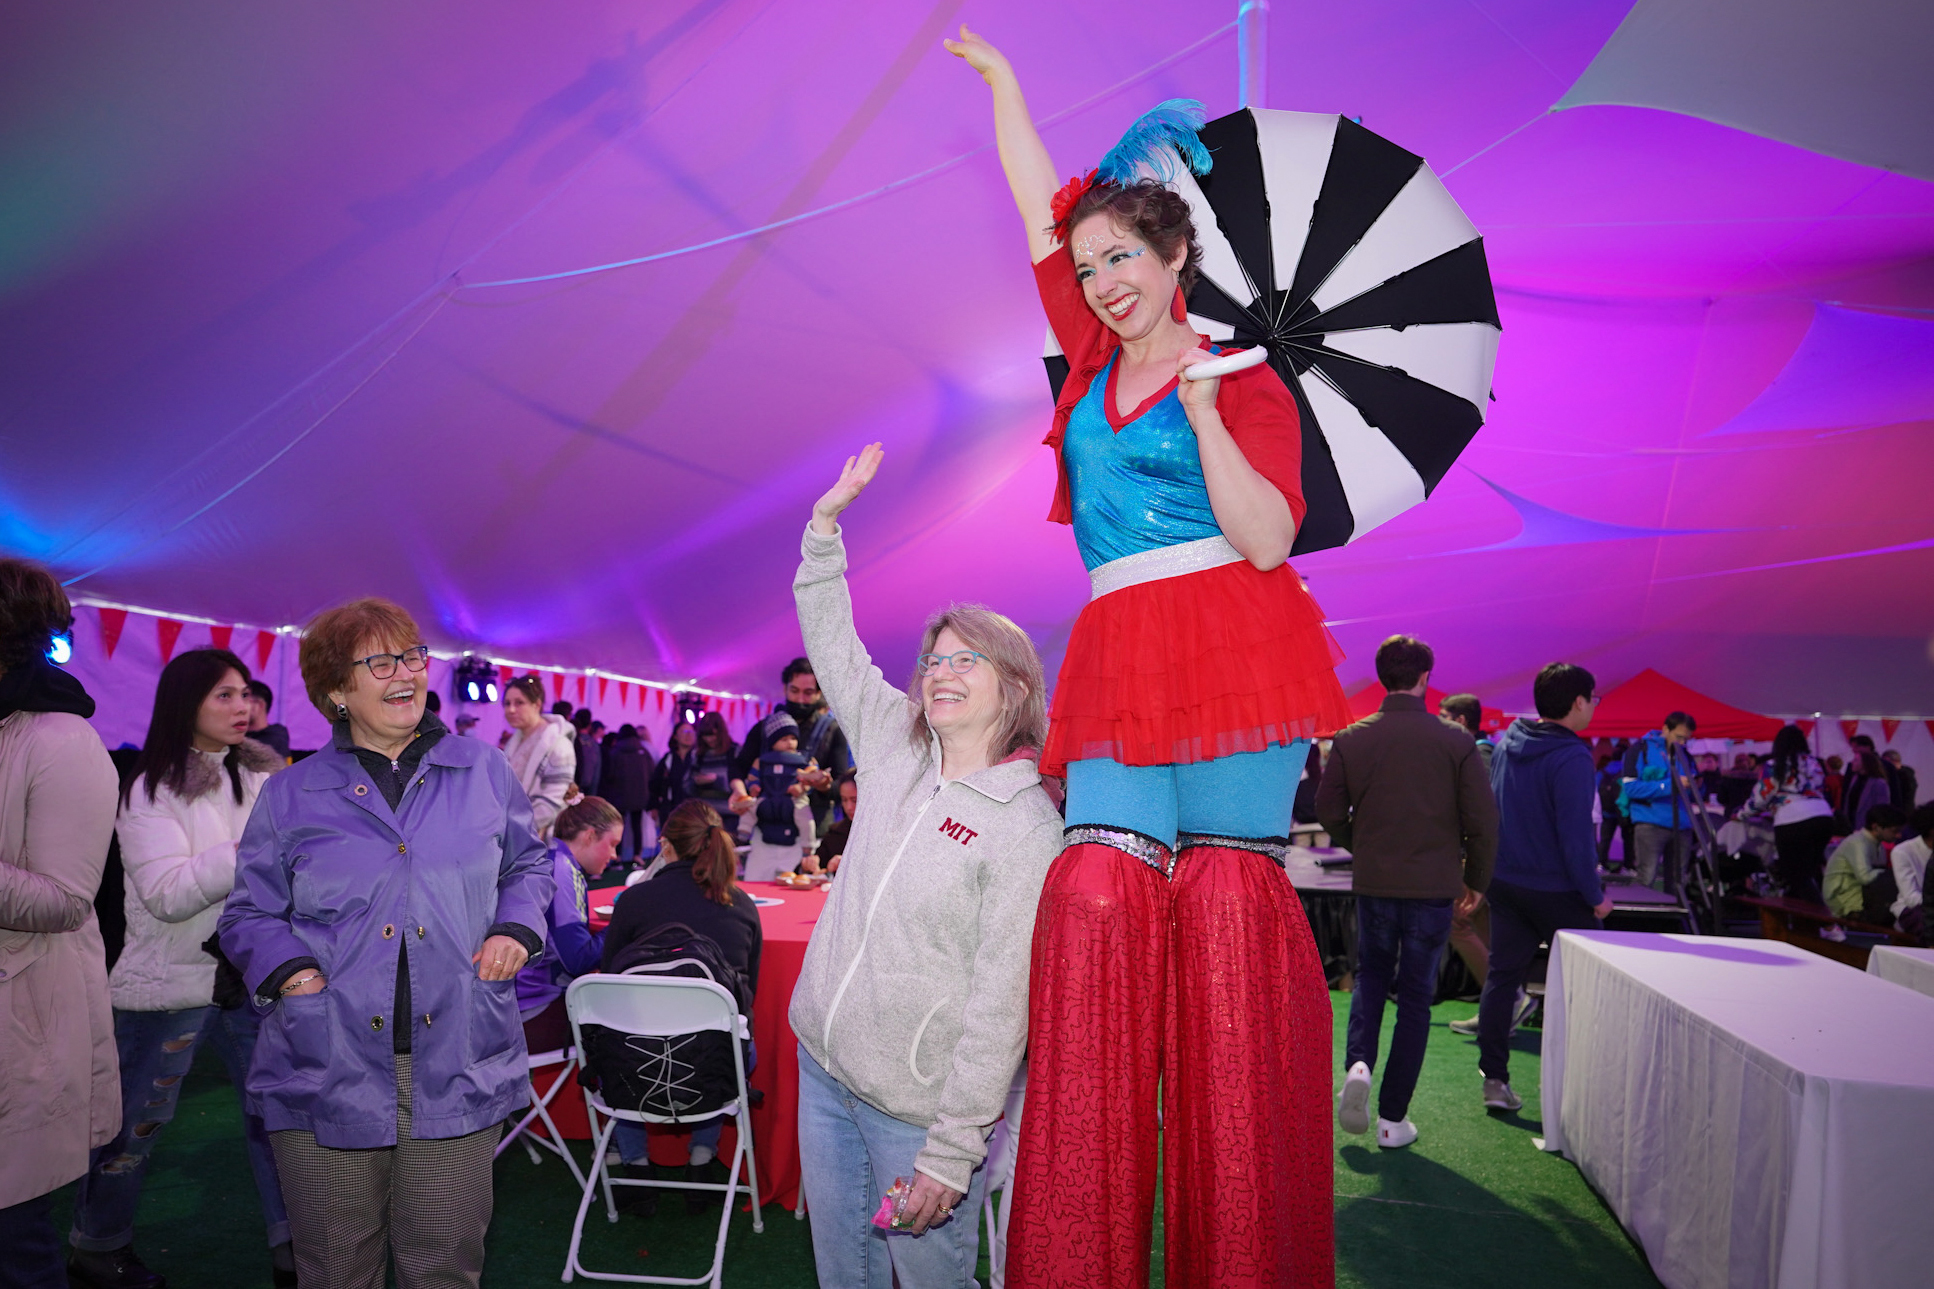 MIT’s campus was transformed Saturday for a community street fair in celebration of the inauguration of Sally Kornbluth, MIT’s 18th president. Under a tent on Hockfield court, Kornbluth posed with one of the many acrobats who performed around campus.